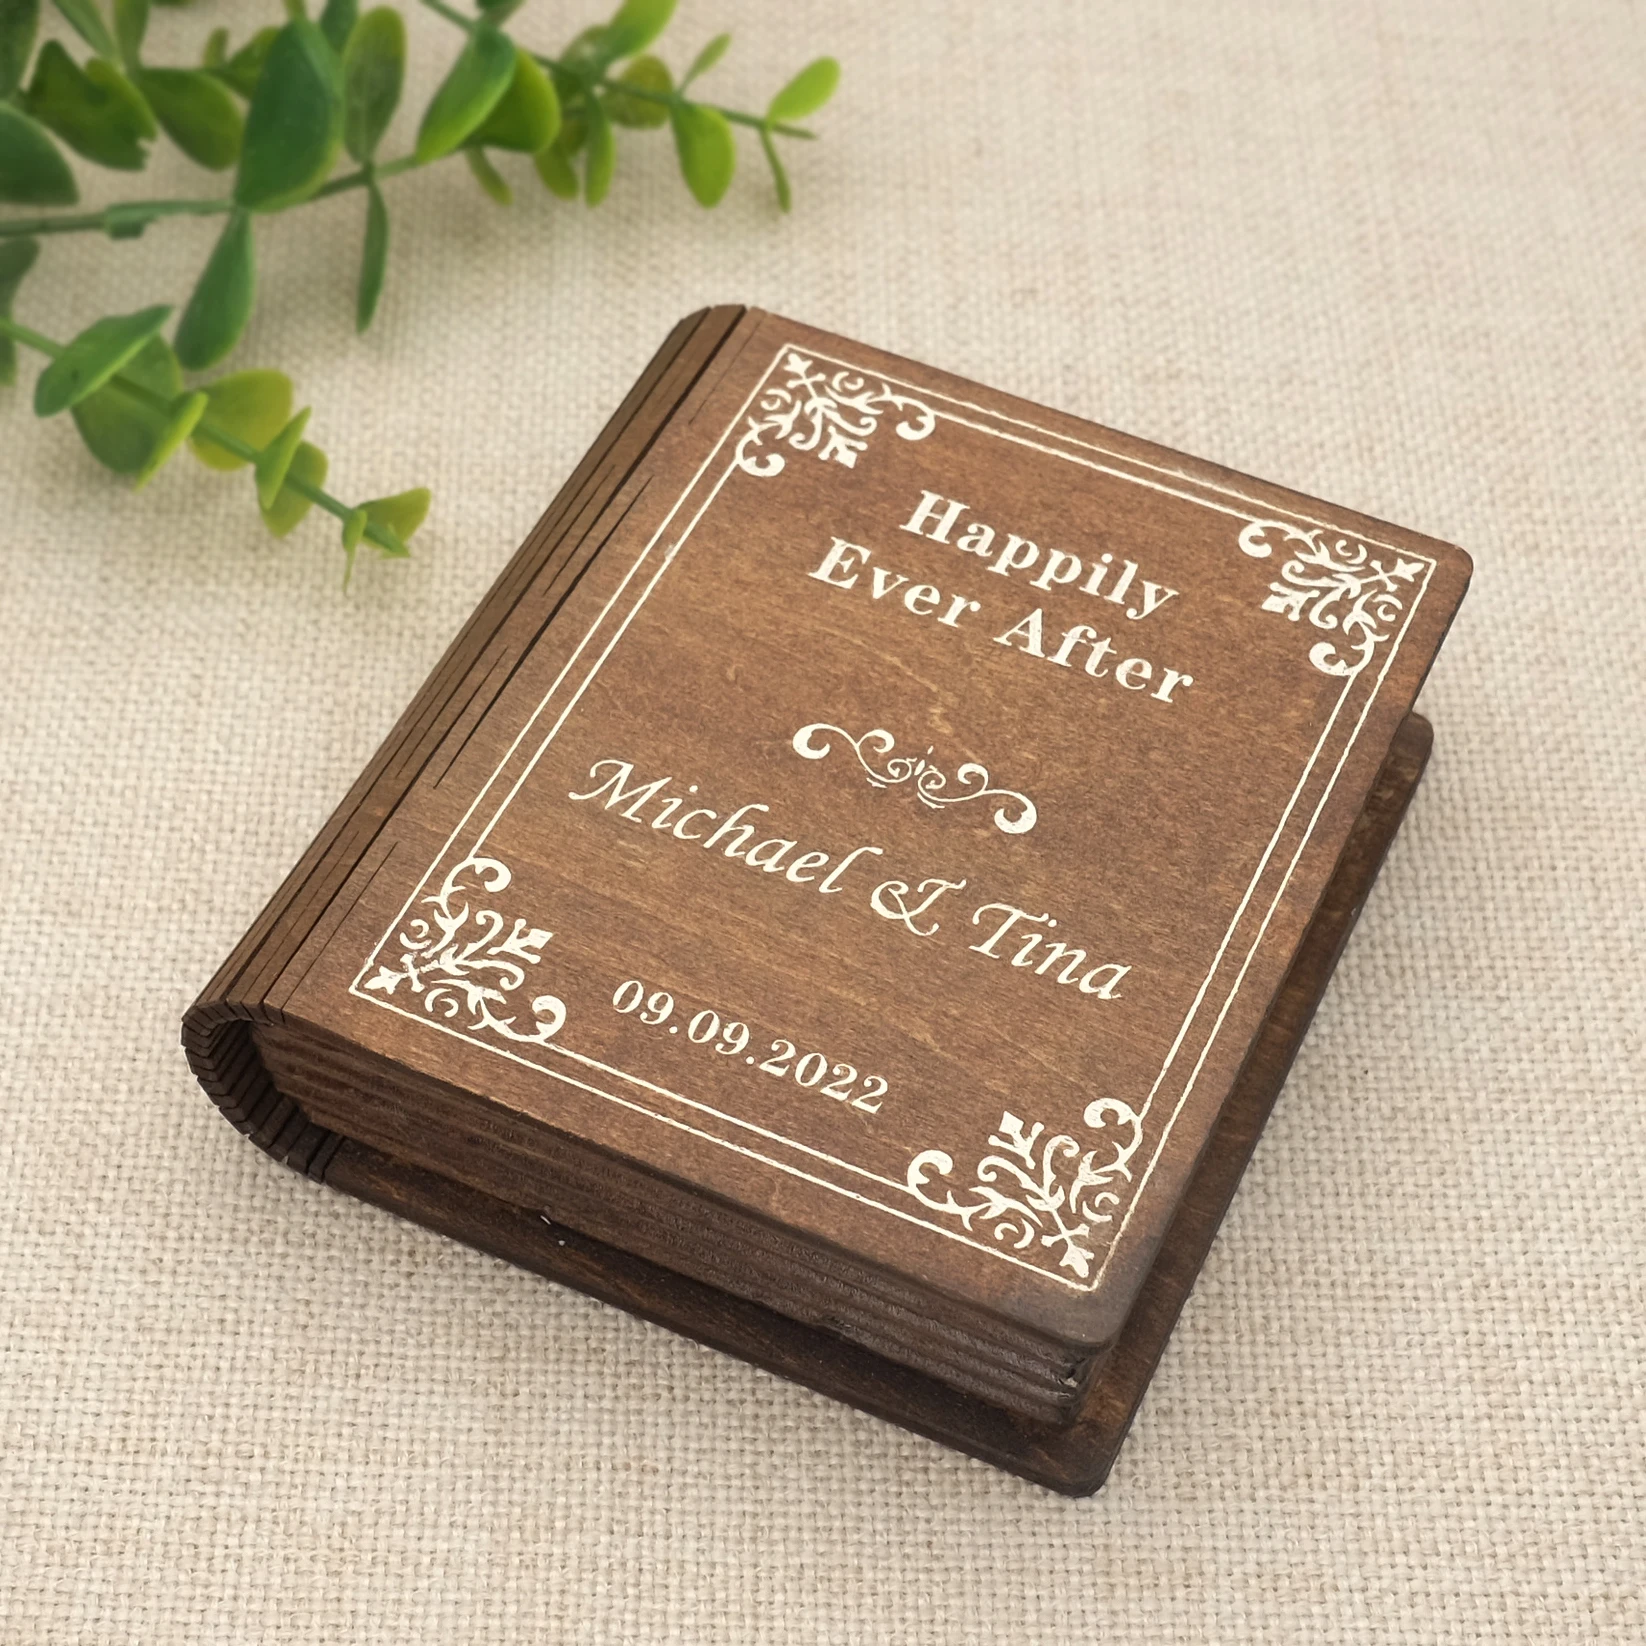 Personalized Wedding Rings Box Custom Wedding Rings Bearer Pillow Rustic Wooden Book Box Engagement Ring Holder Wedding Decor personalized hexagon ring bearer box wedding glass ring box decoration engagement box geometric jewelry storage box propose gift